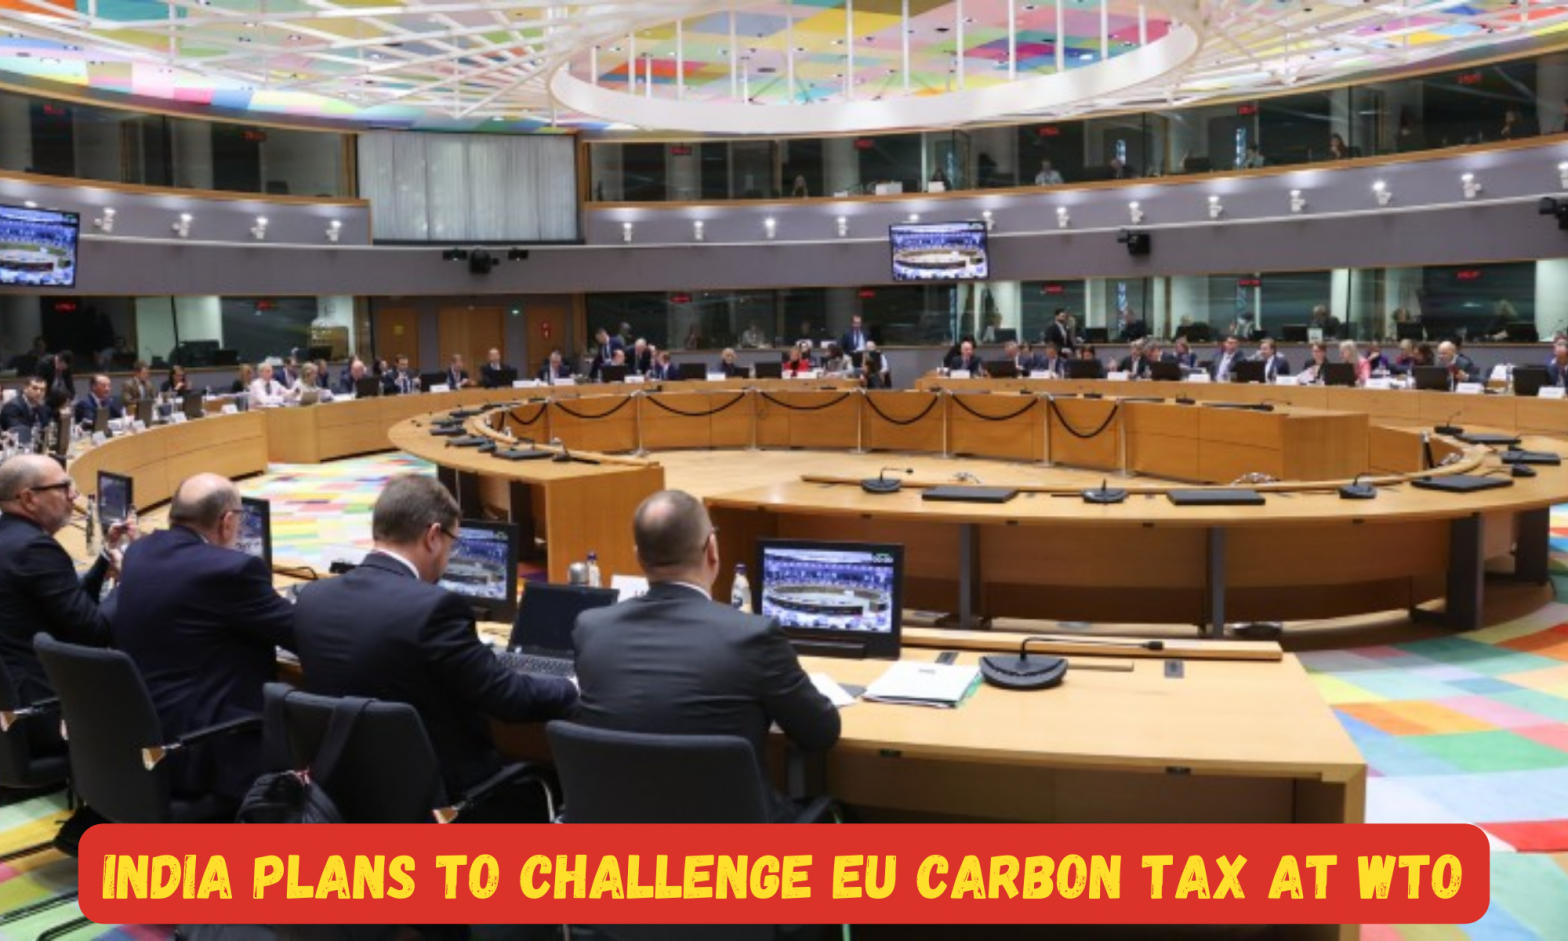 India plans to challenge EU carbon tax at WTO